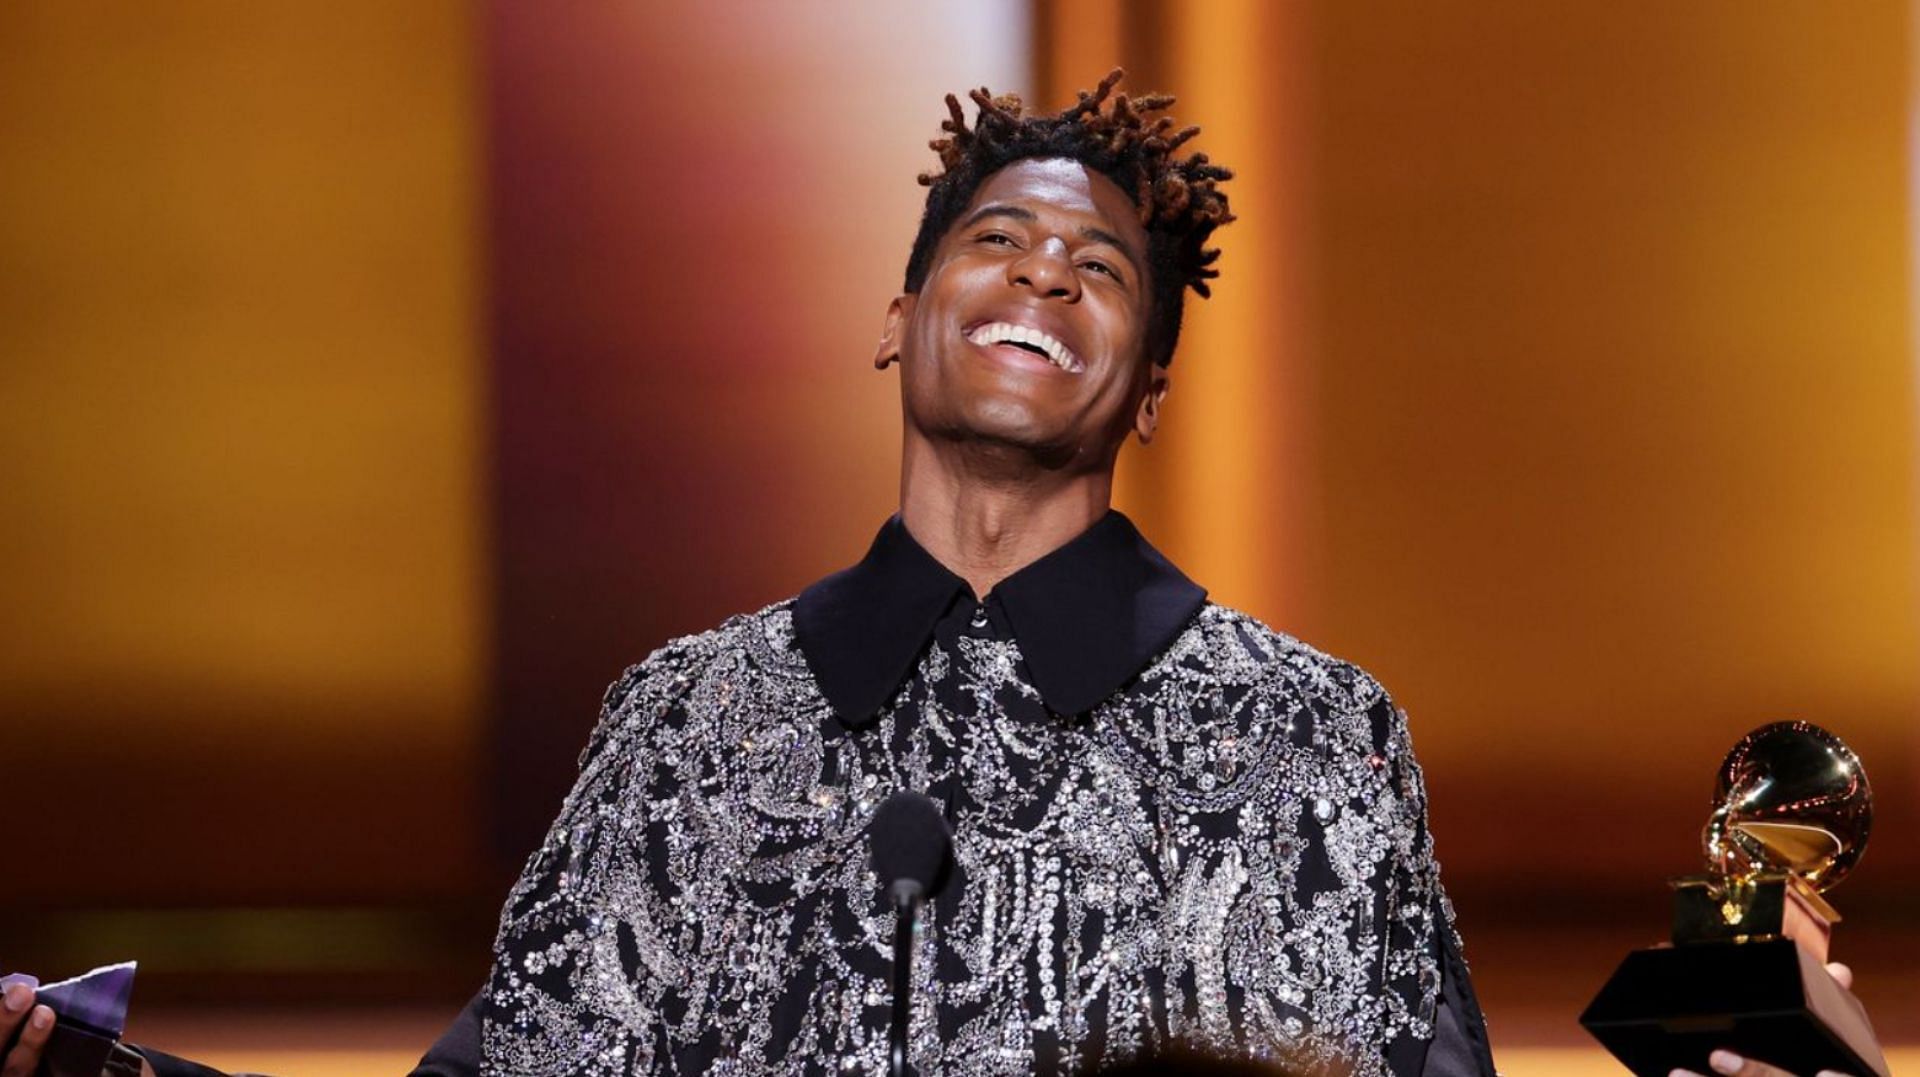 An elated Batiste on the stage (Image via Rich Fury/Getty Images)